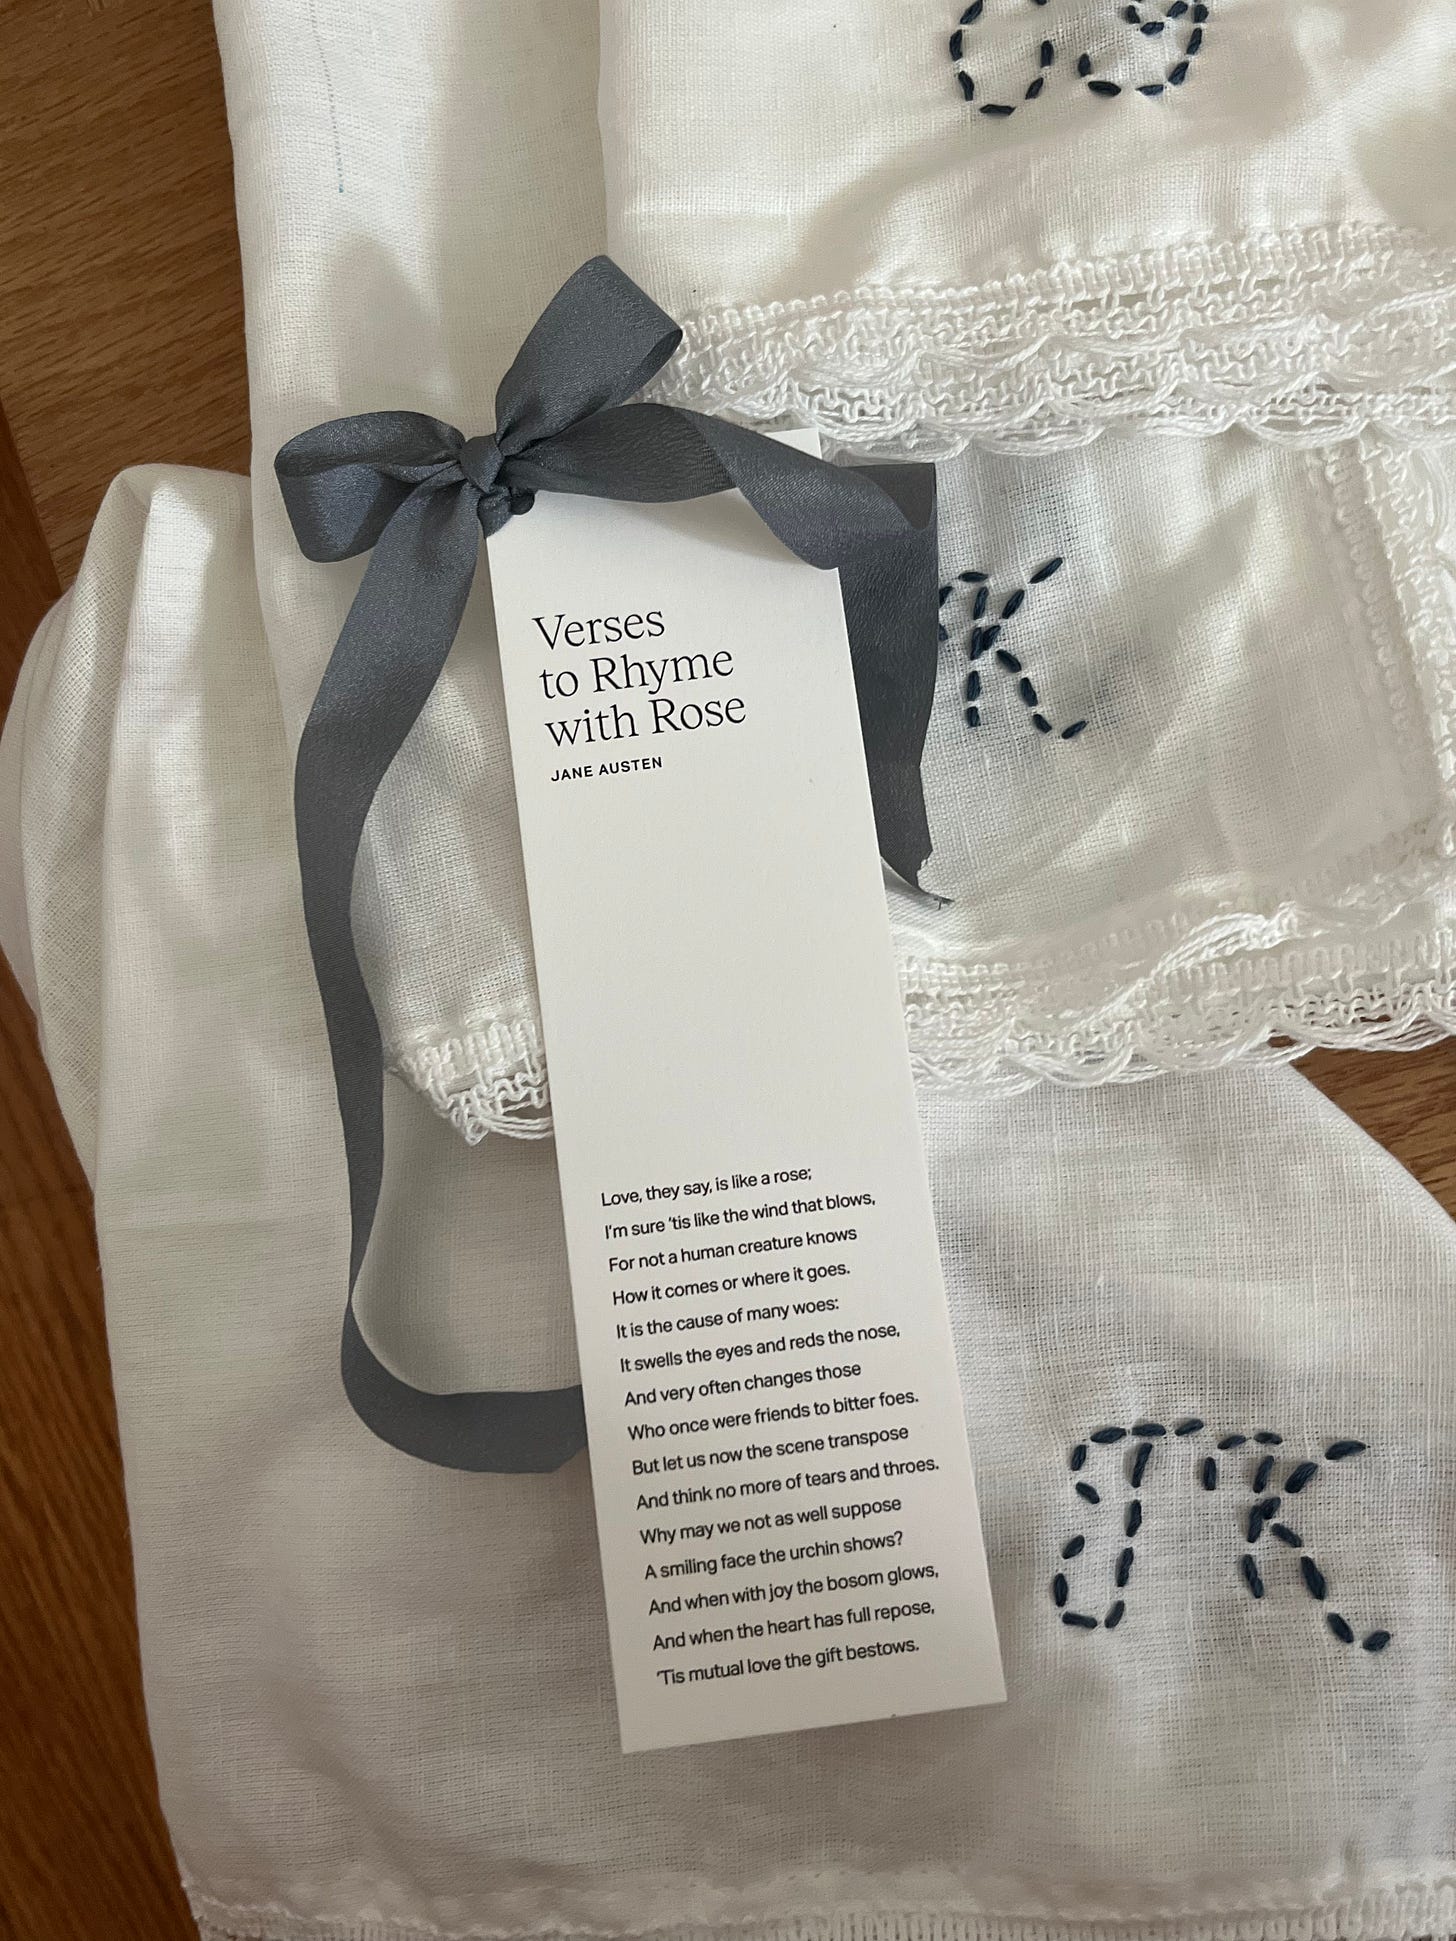 A bookmark tied in a bow with "Verses to Rhyme with Rose" printed on it.